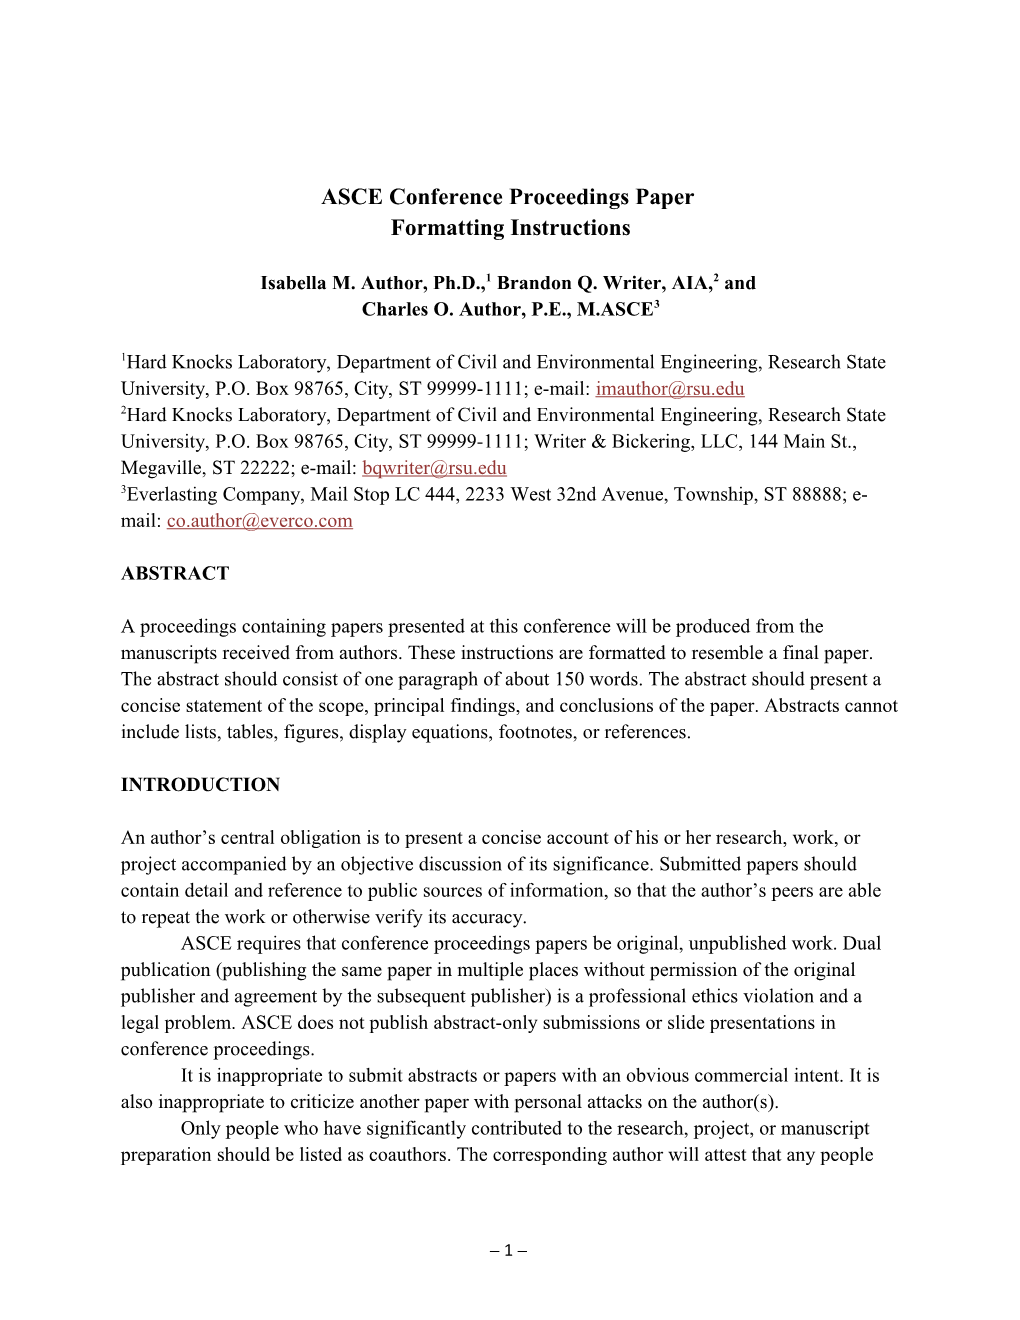 ASCE Conference Proceedings Paper Formatting Instructions